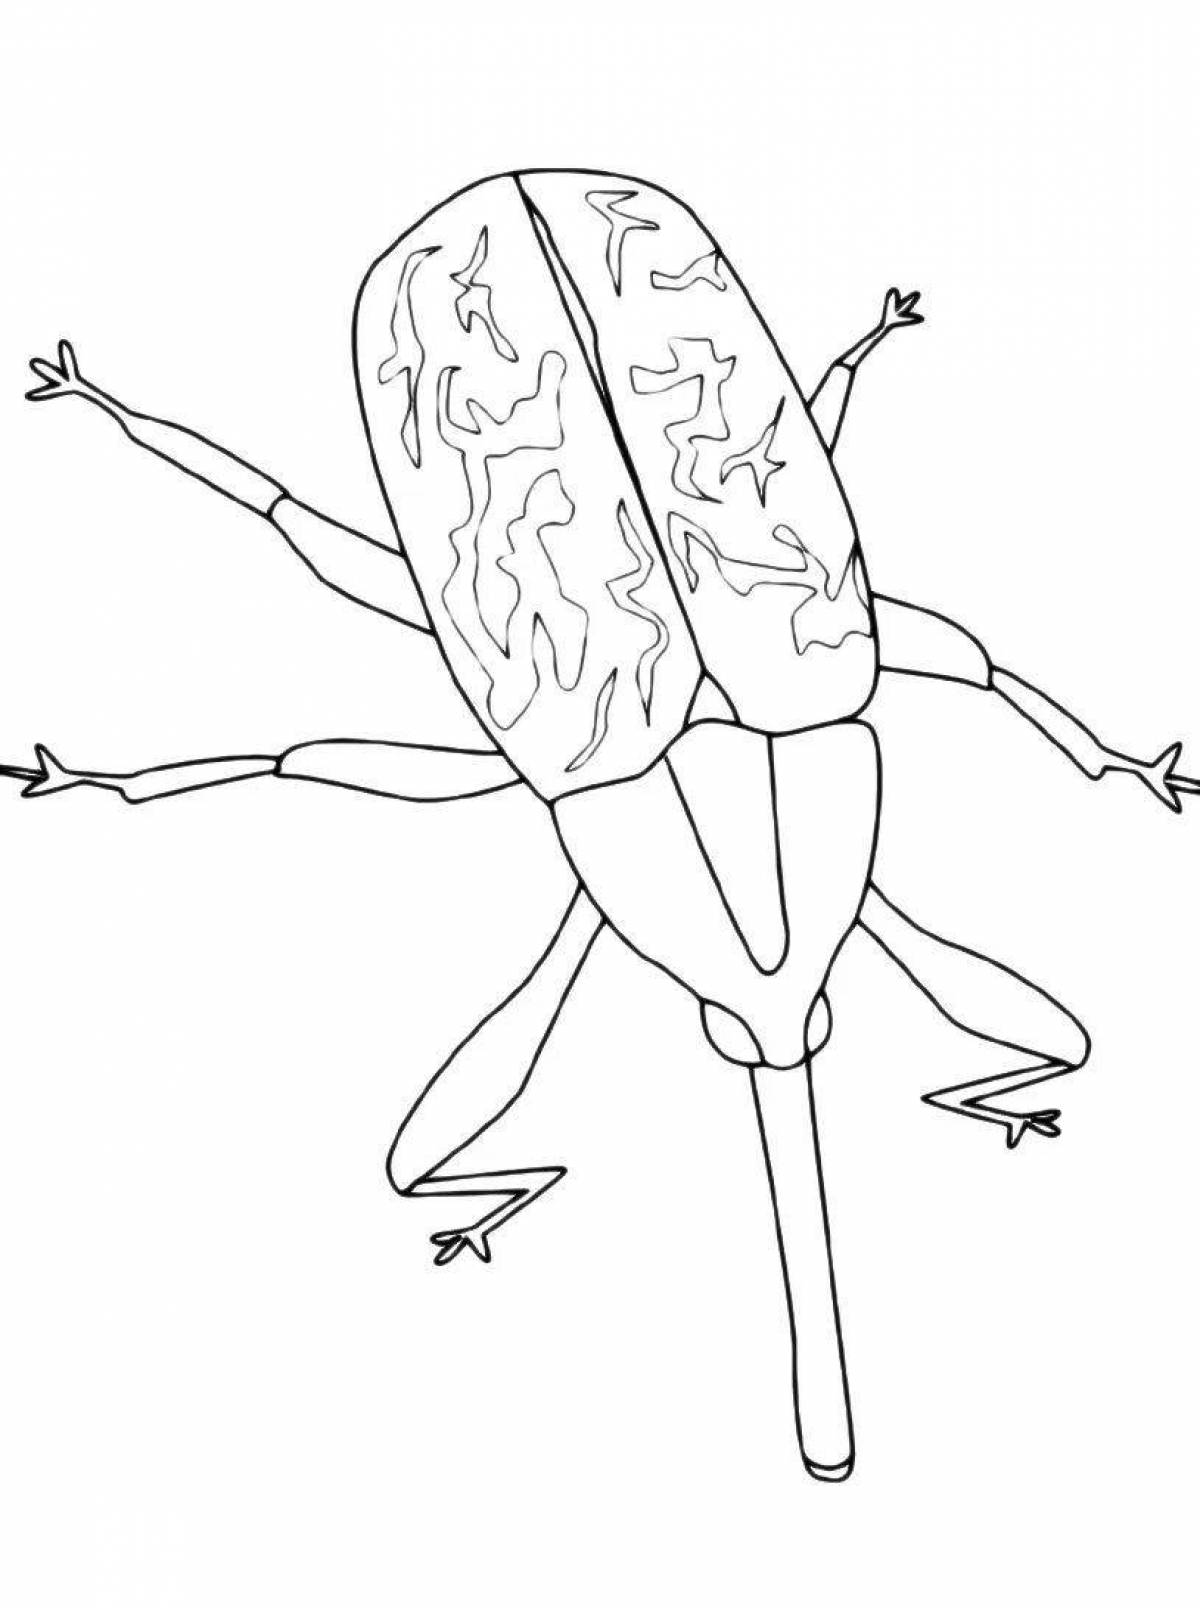 Intriguing coloring page bug